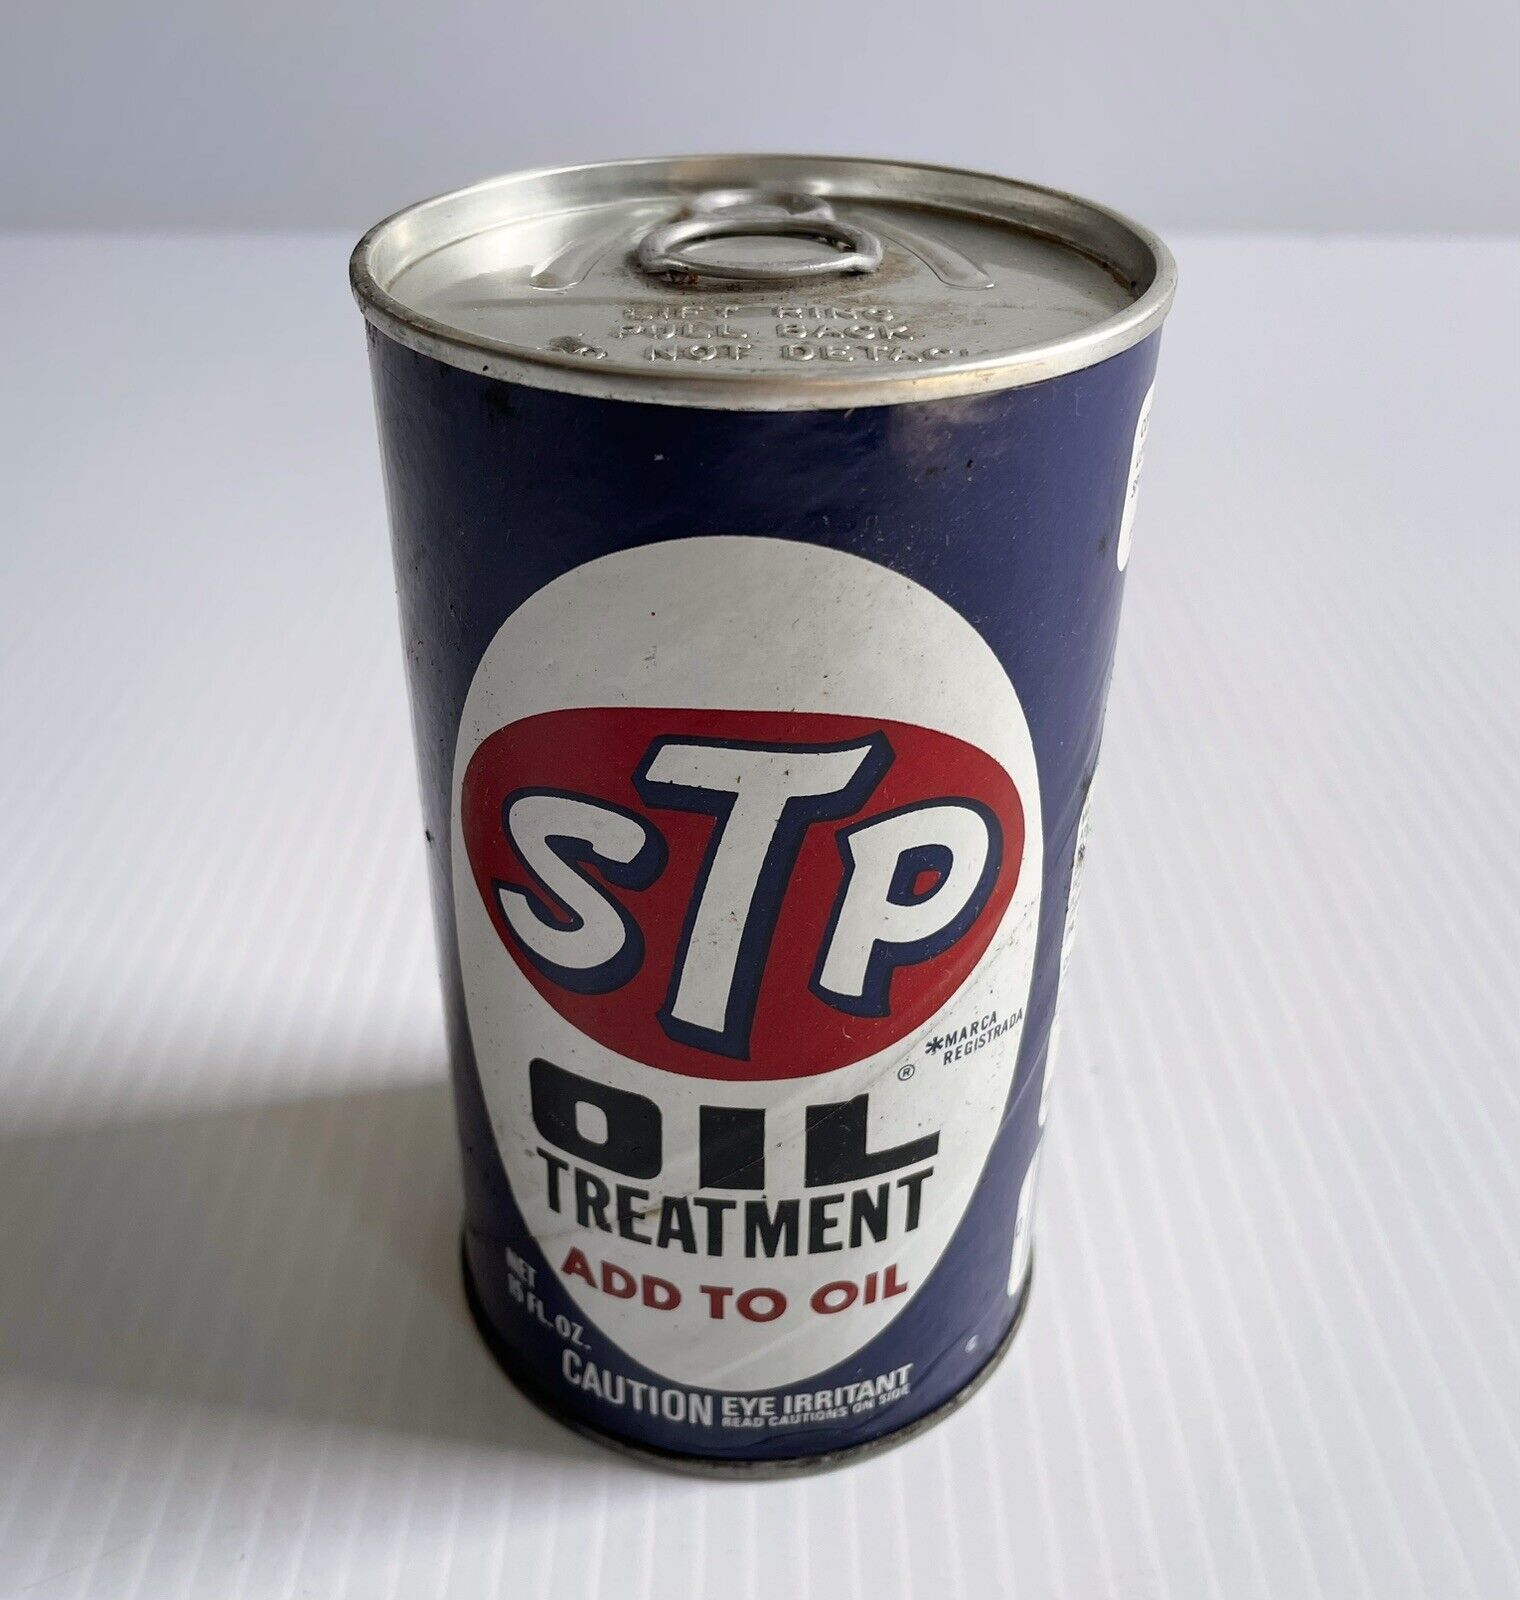 Vintage STP Motor Oil Treatment Pull Top Can 15 FL. OZ. Unopened